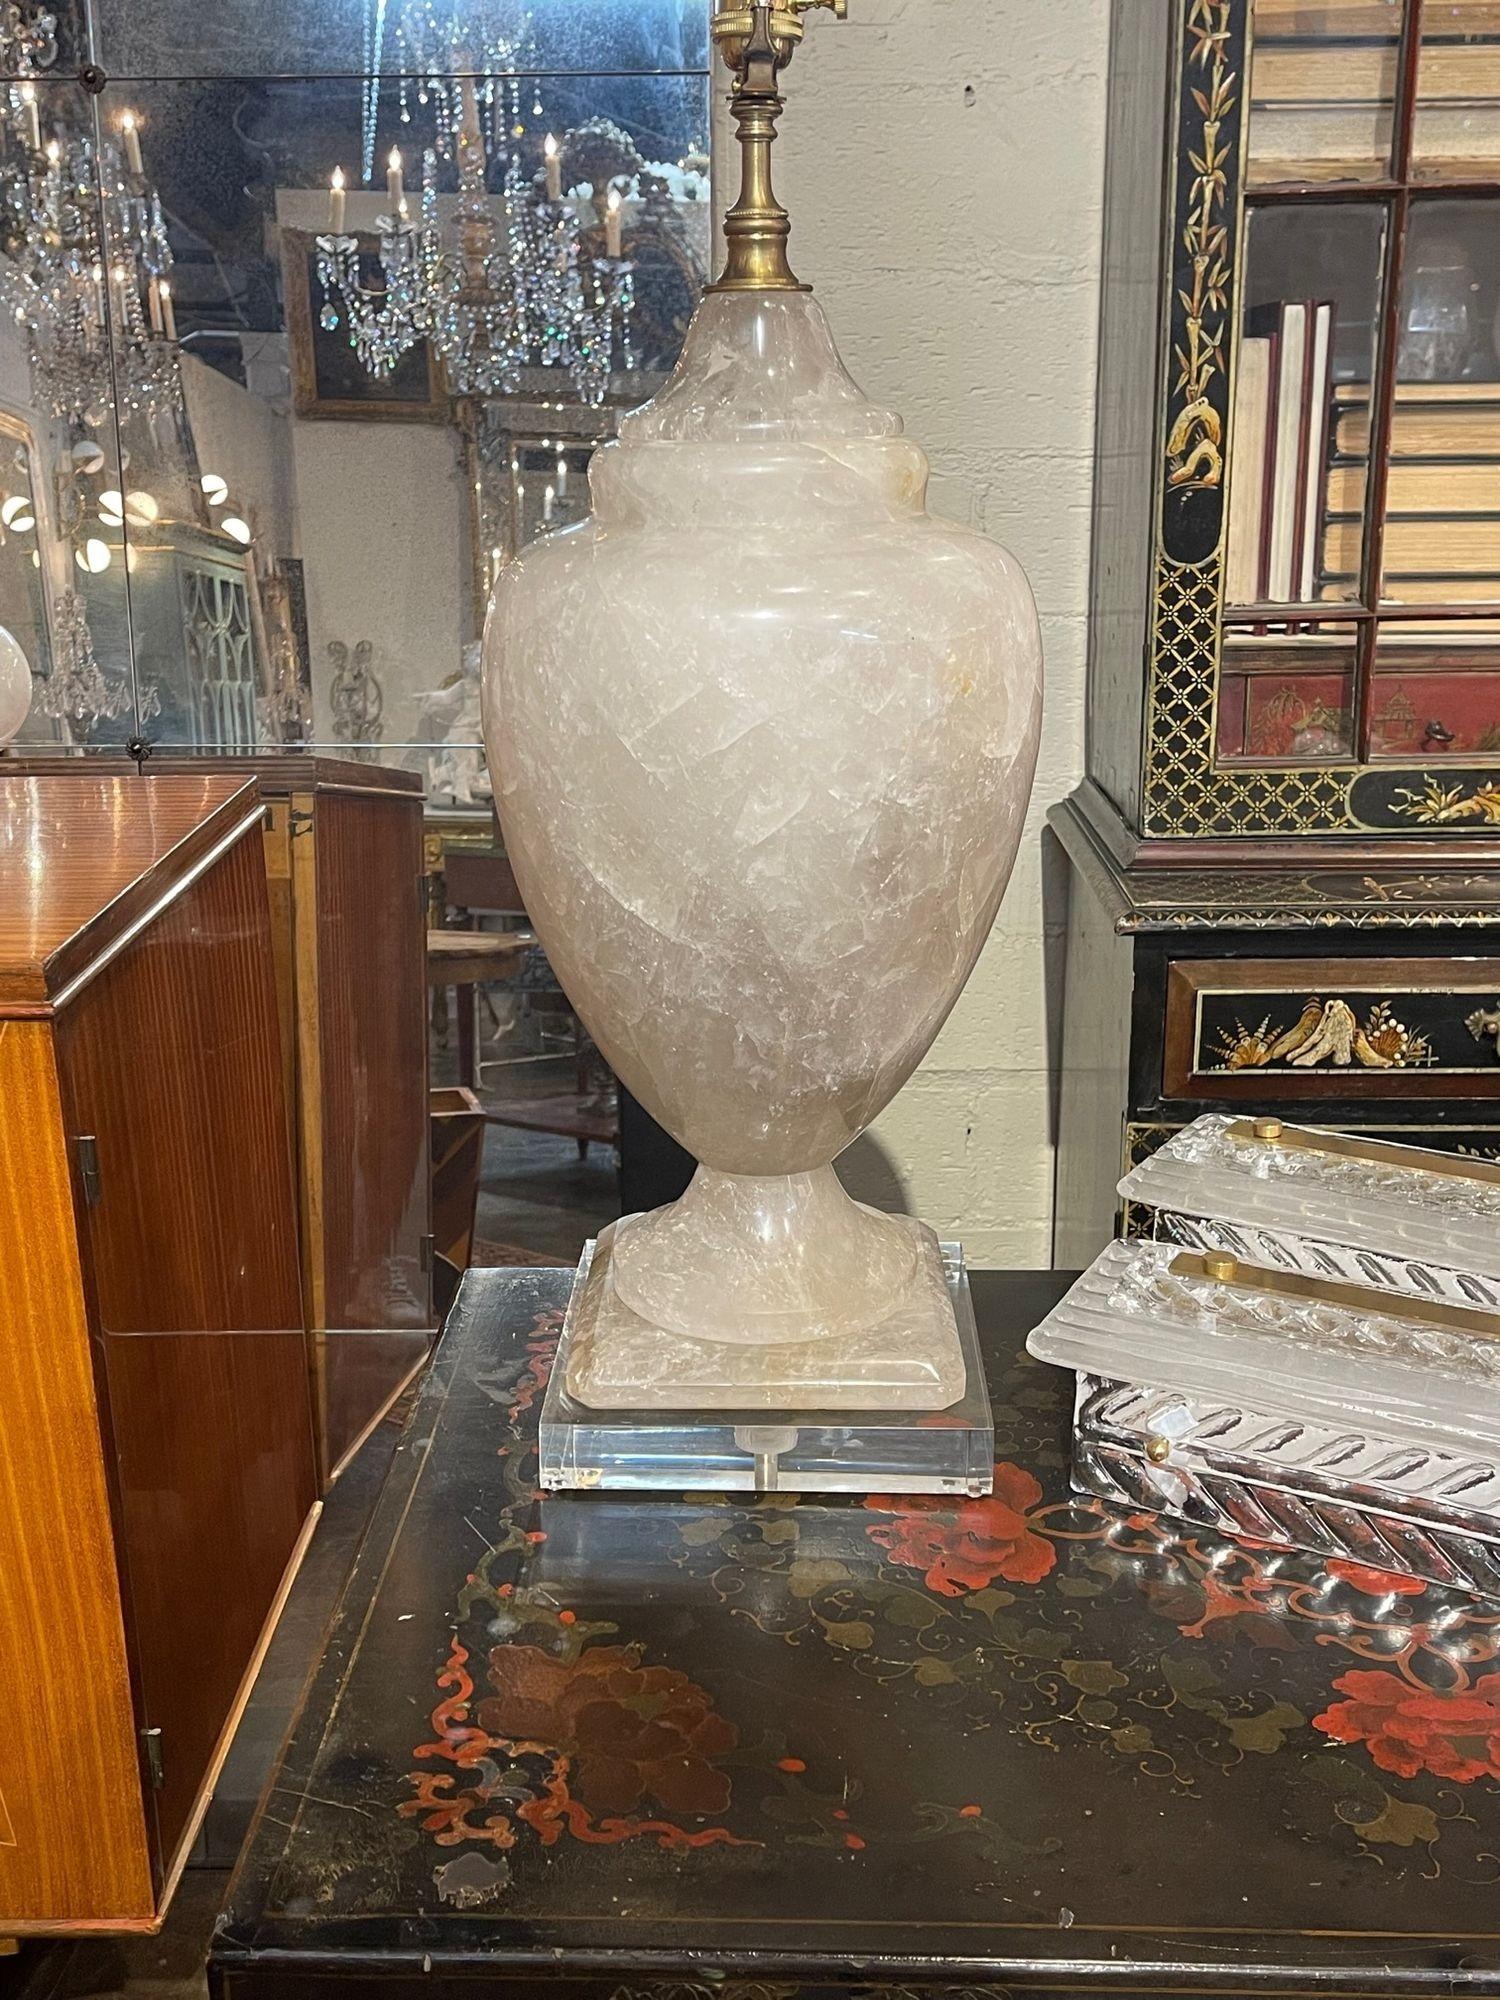 Very fine large scale polished rock crystal lamp from Brazil. Beautiful urn shape on a lucite base. Creates a very elegant touch! So impressive!